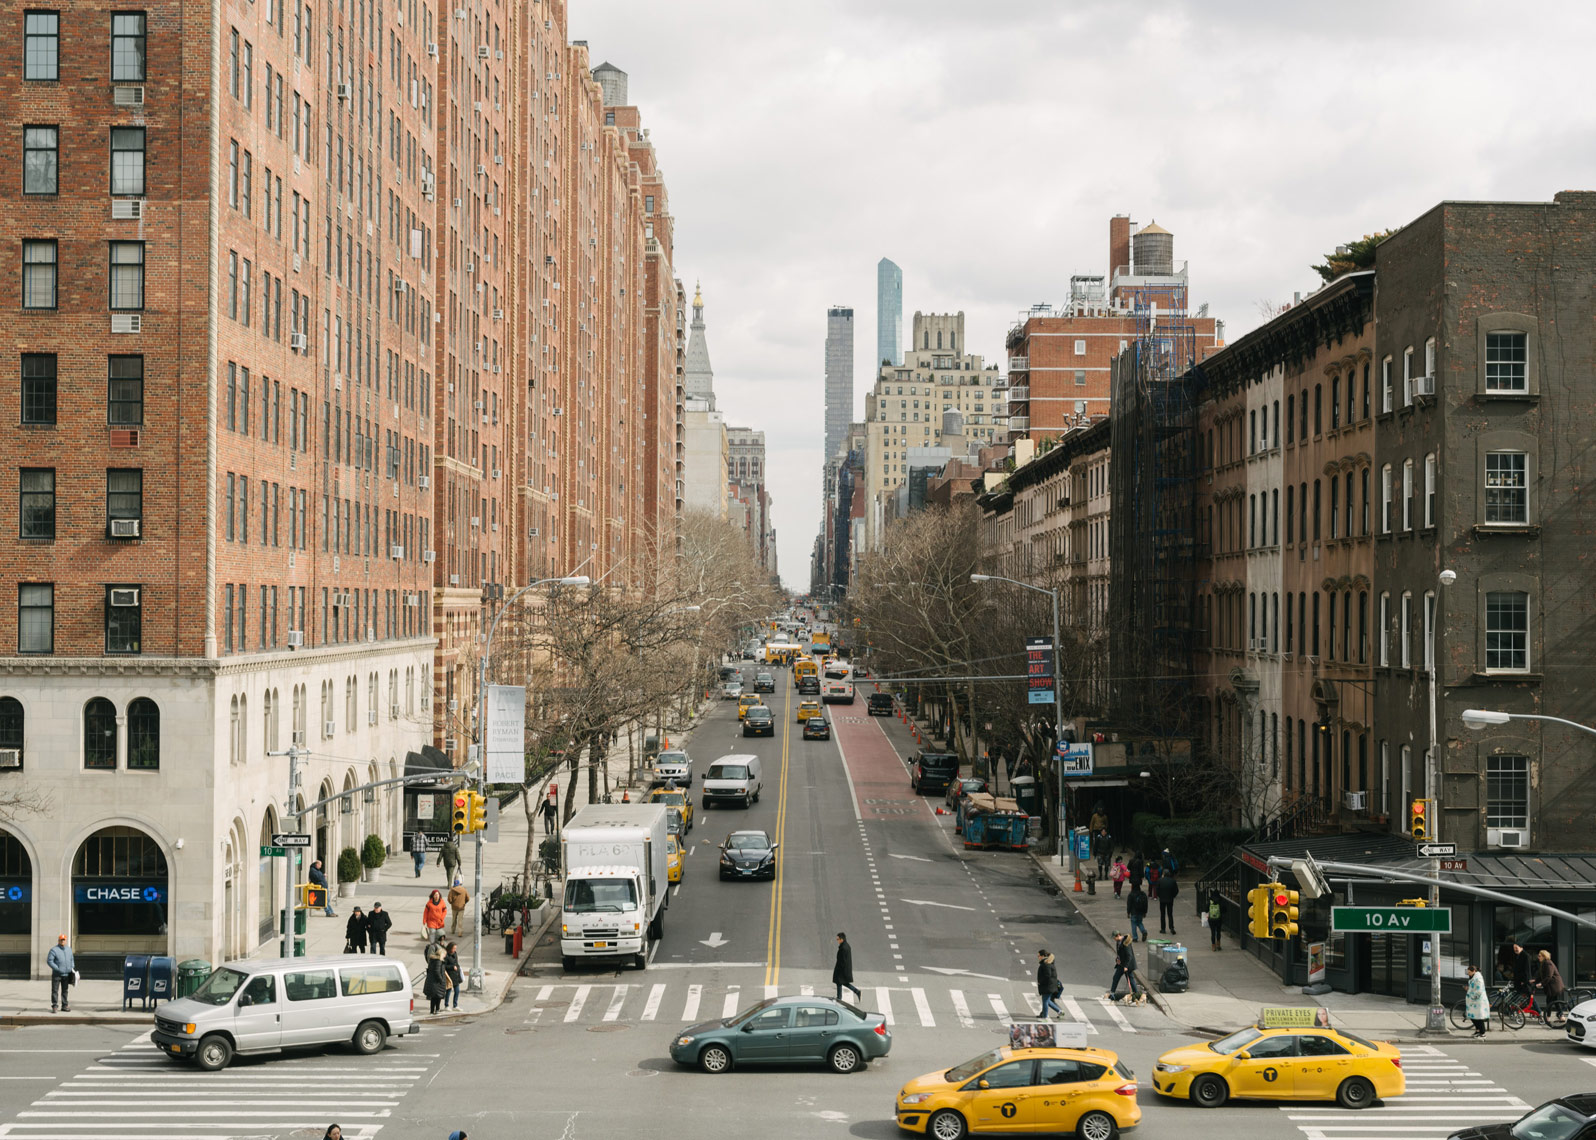 View of New York Streets from the Highline